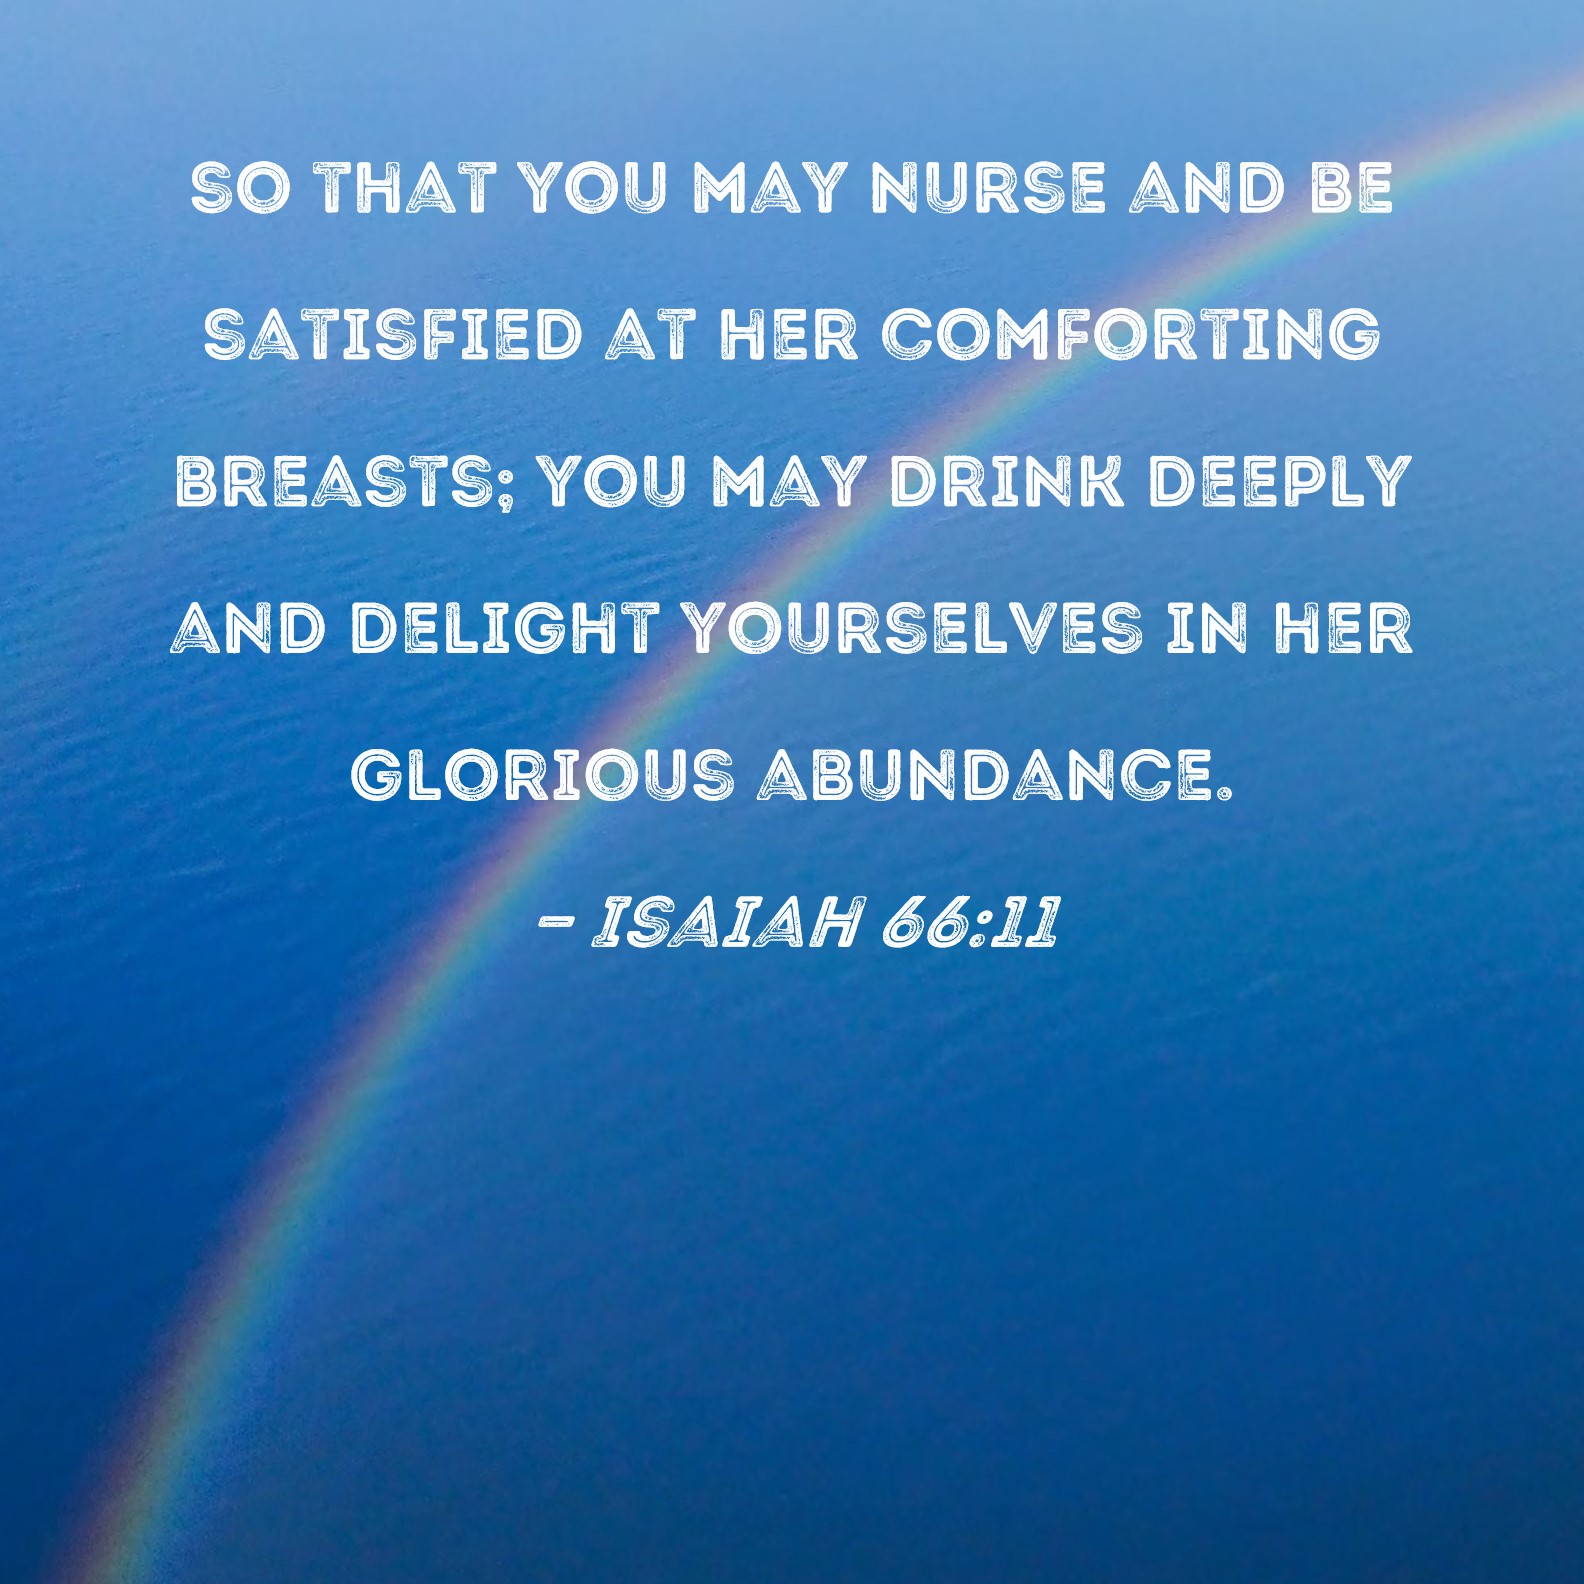 Isaiah 6611 so that you may nurse and be satisfied at her comforting breasts; you may drink deeply and delight yourselves in her glorious abundance. pic